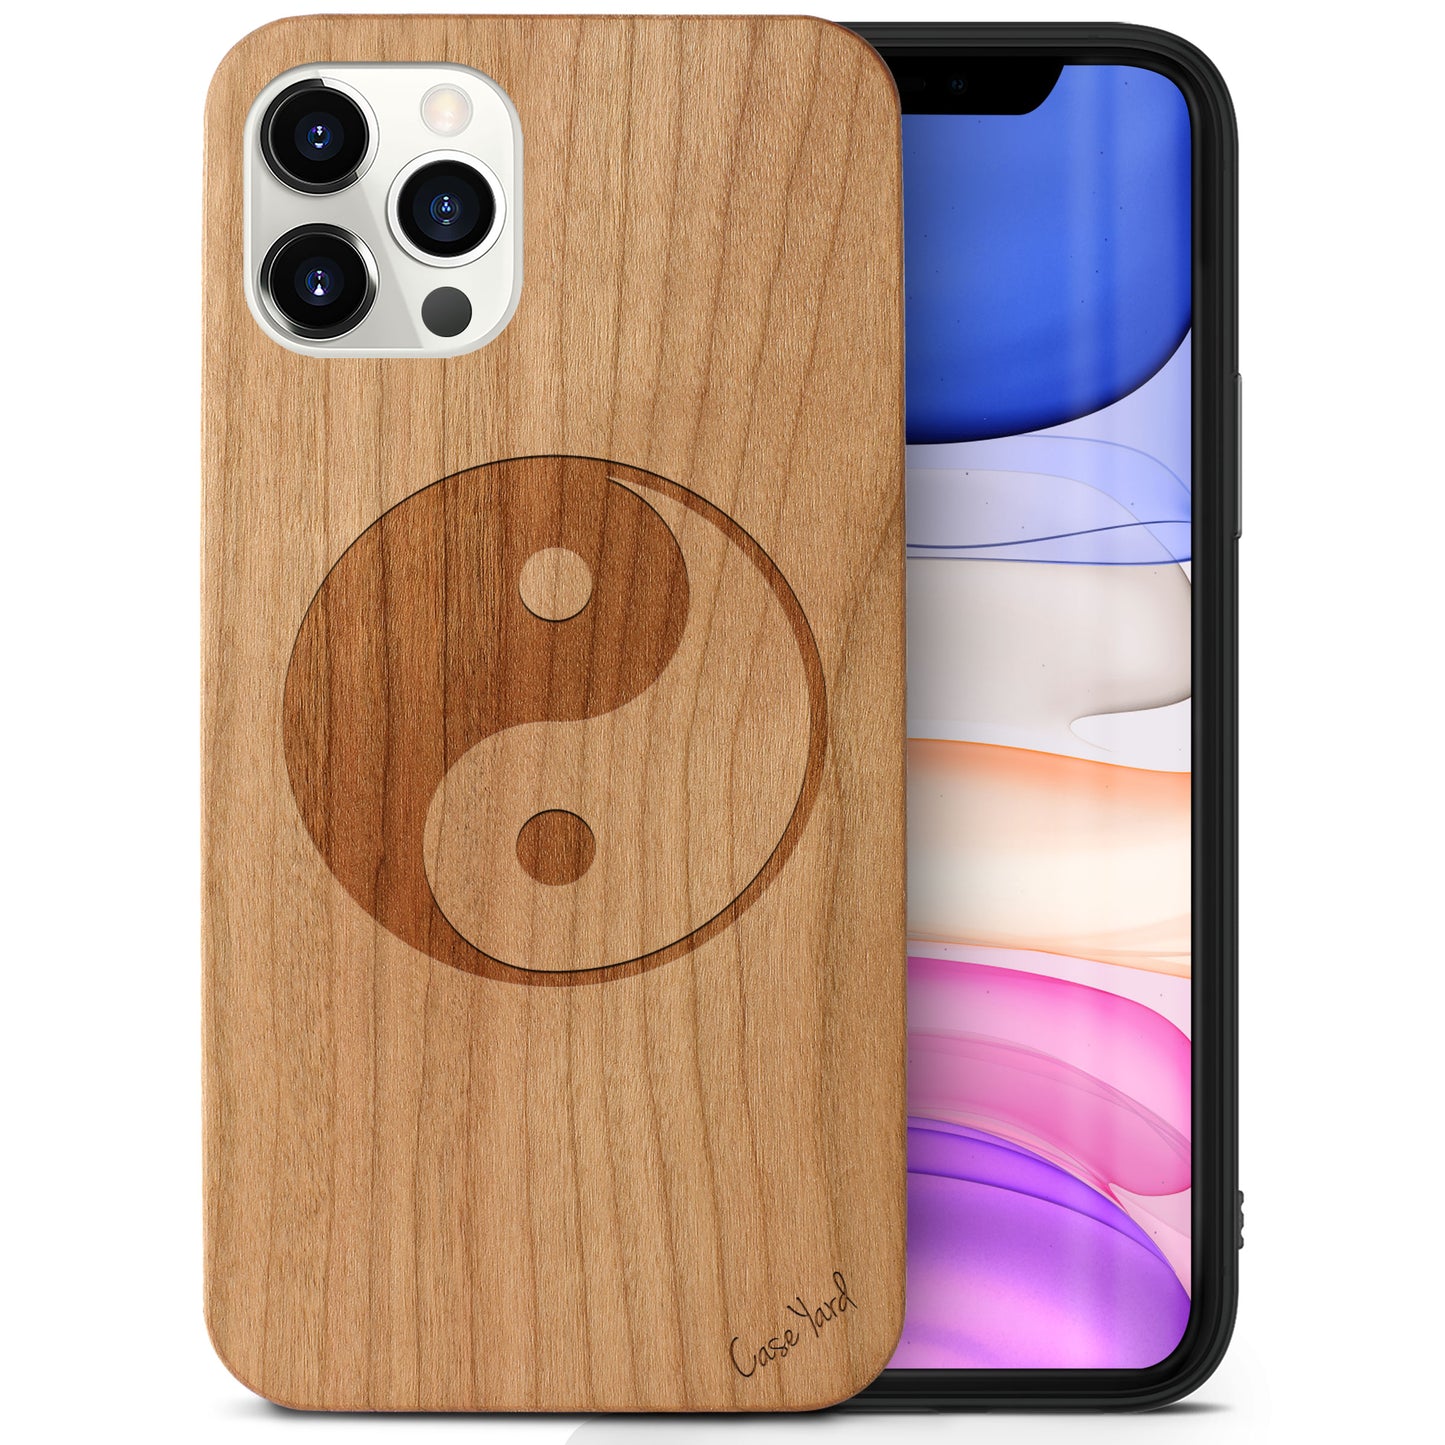 Wooden Cell Phone Case Cover, Laser Engraved case for iPhone & Samsung phone Yin Yang Design